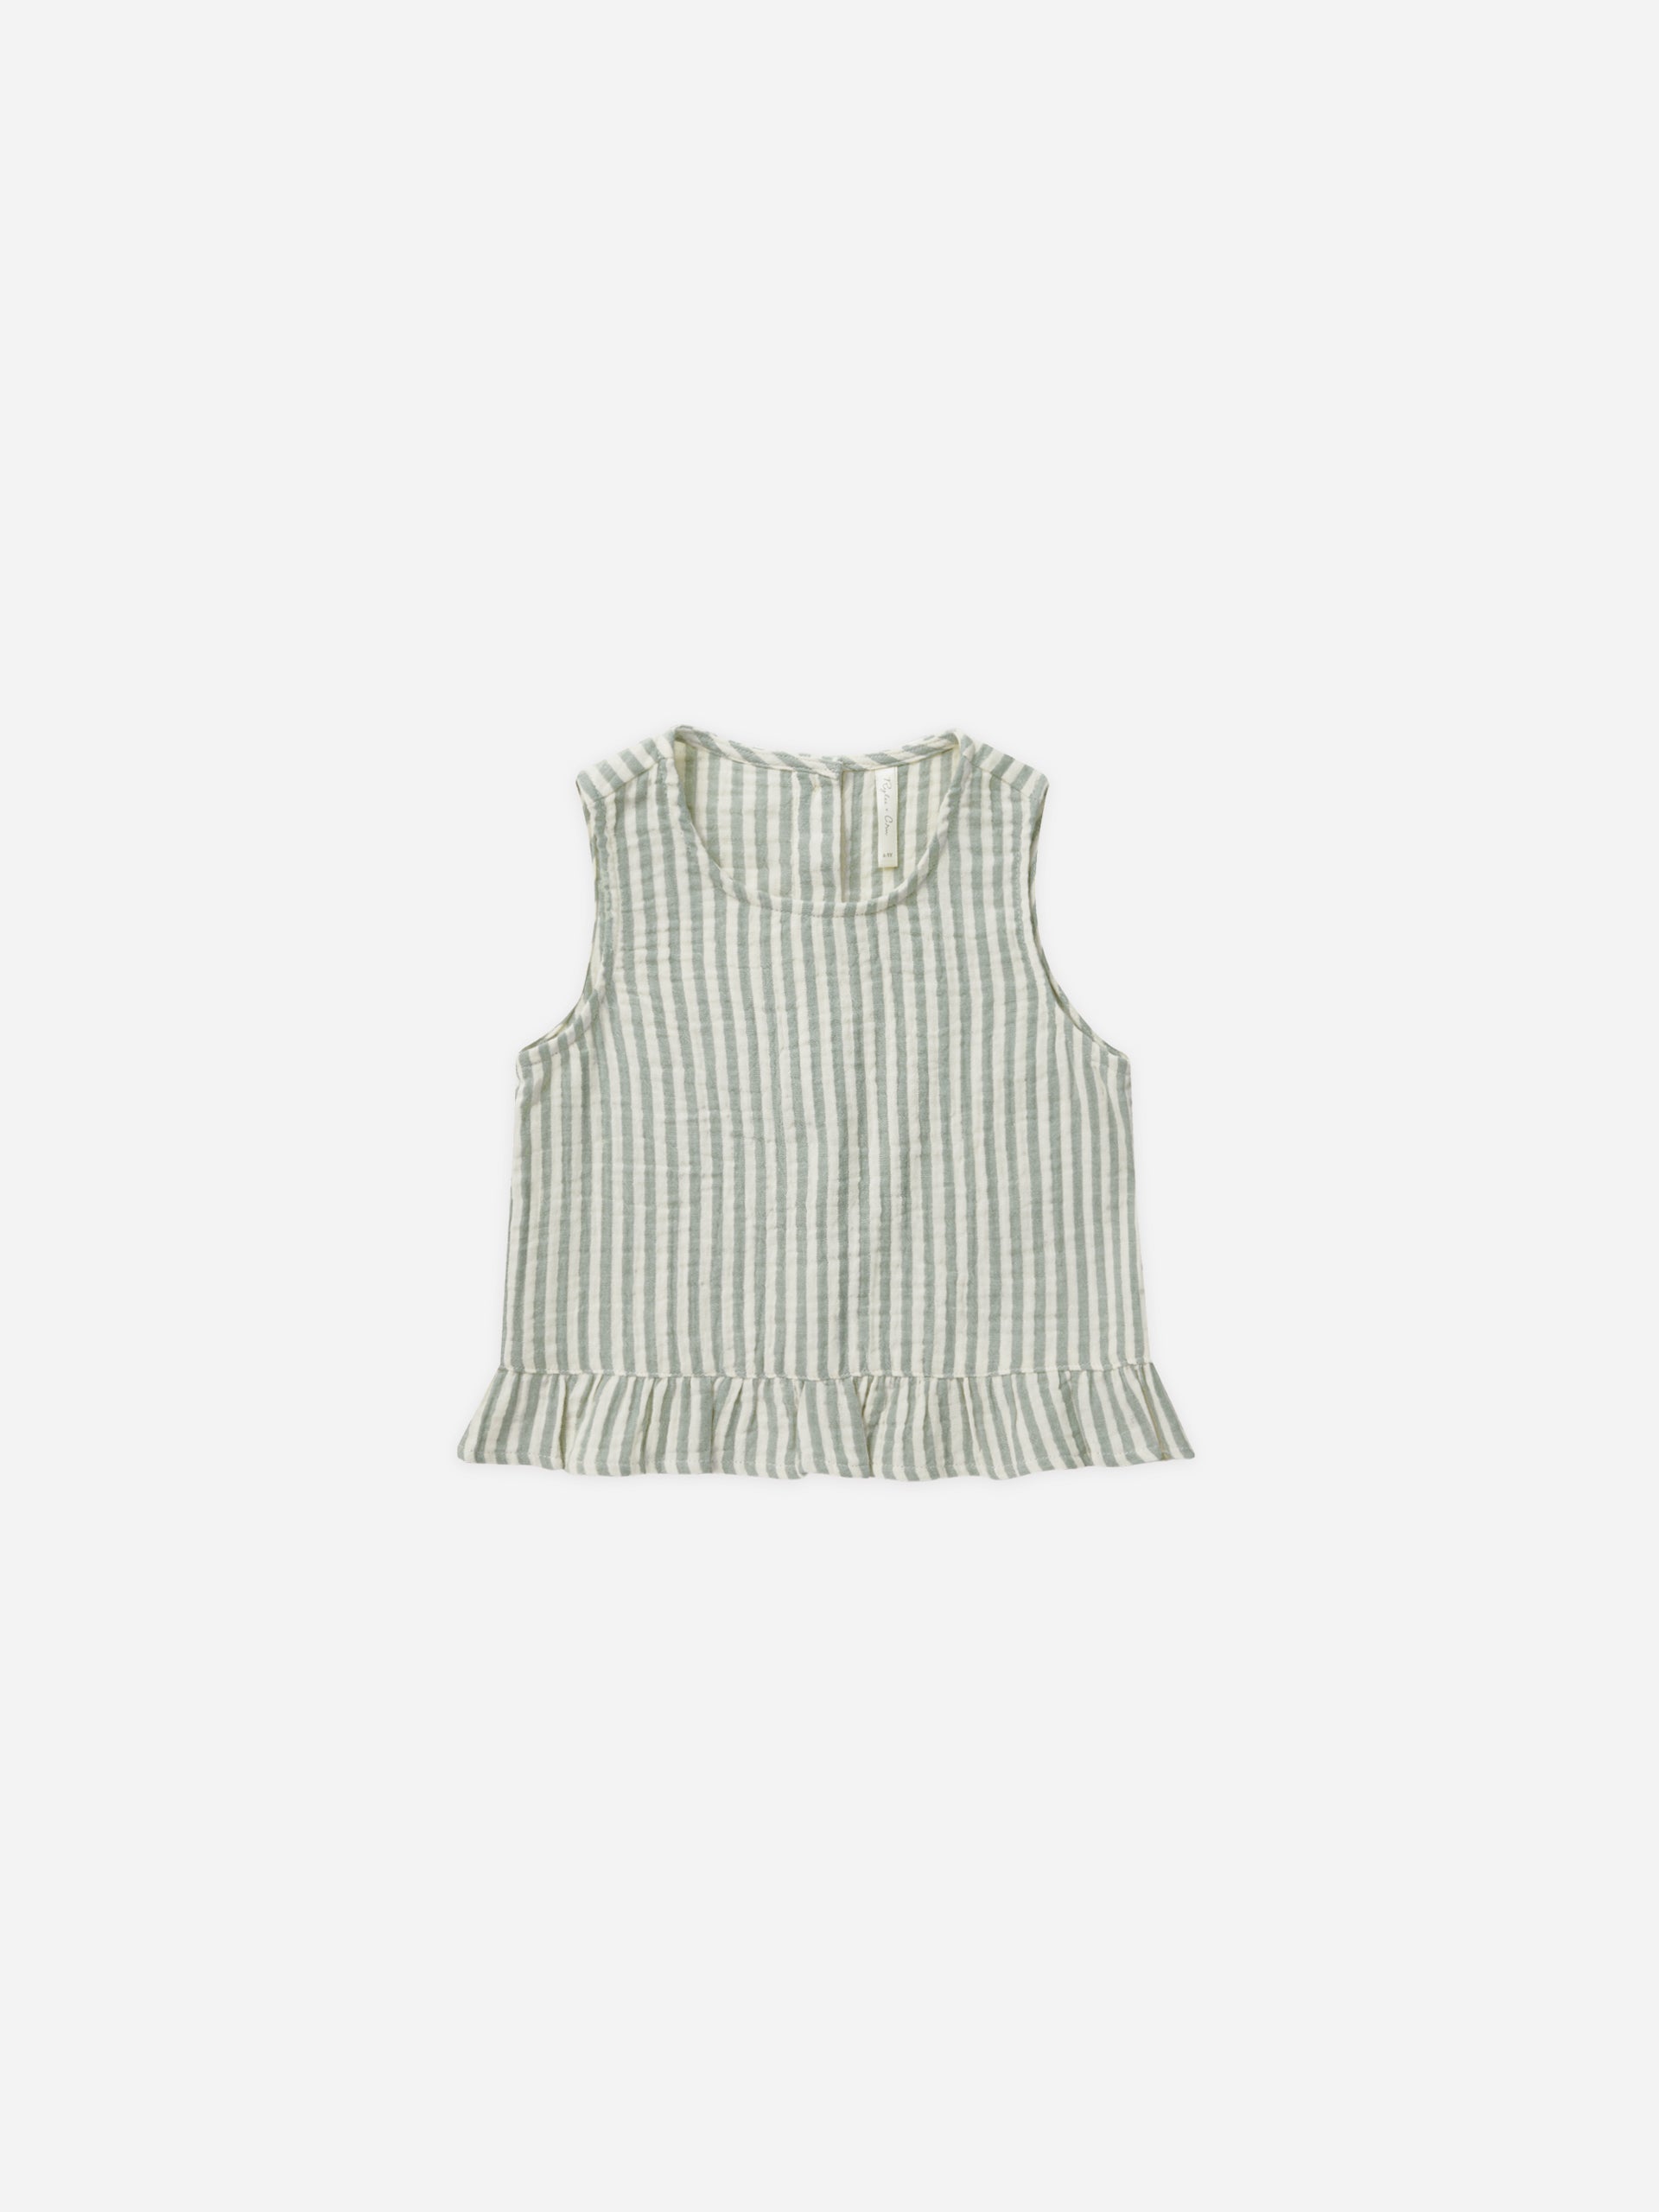 Oceanside Top || Summer Stripe - Rylee + Cru | Kids Clothes | Trendy Baby Clothes | Modern Infant Outfits |